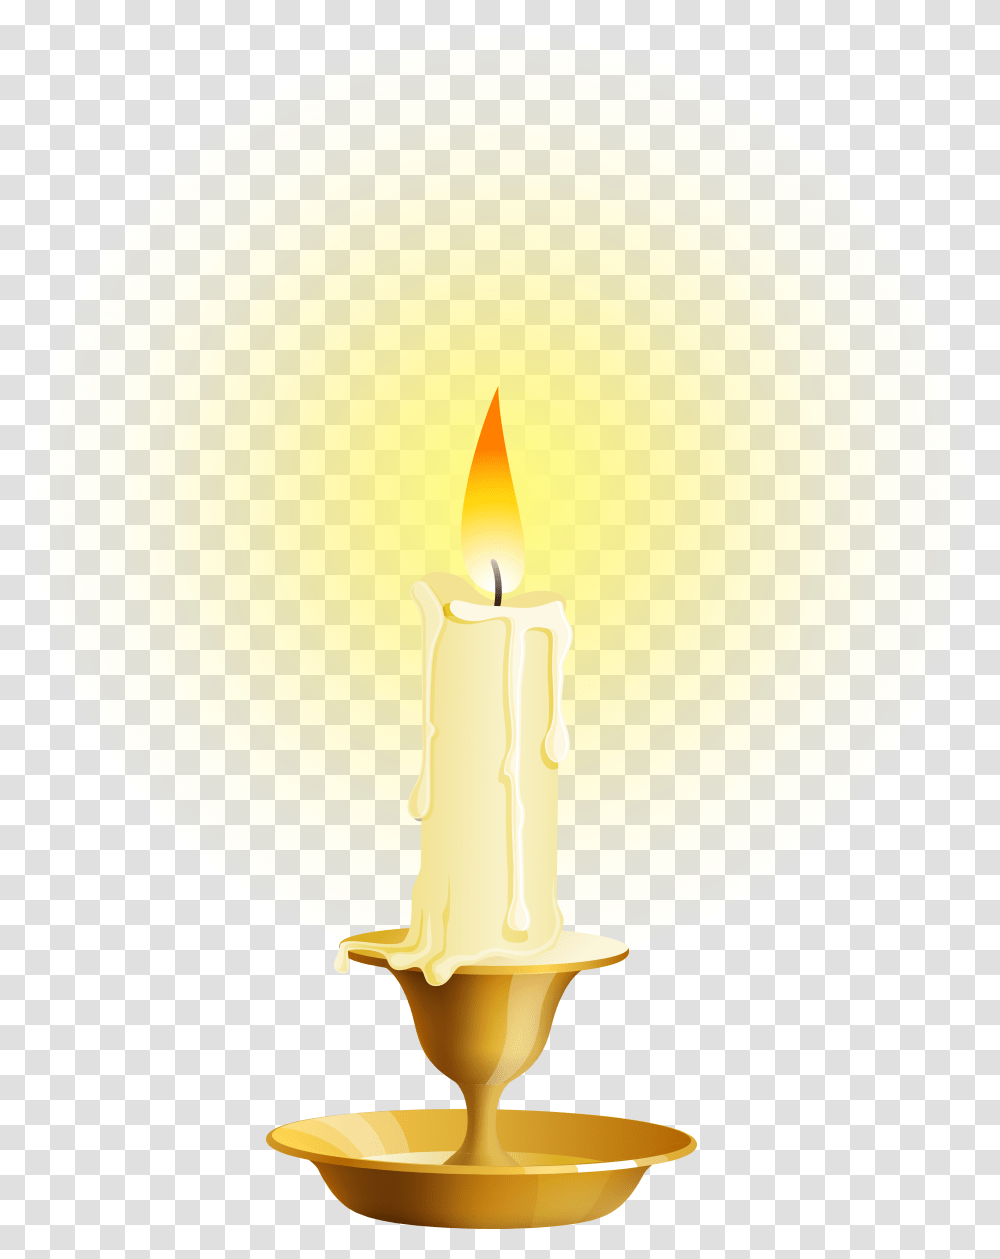 White Candle Clip Art Candle Images, Lamp Transparent Png